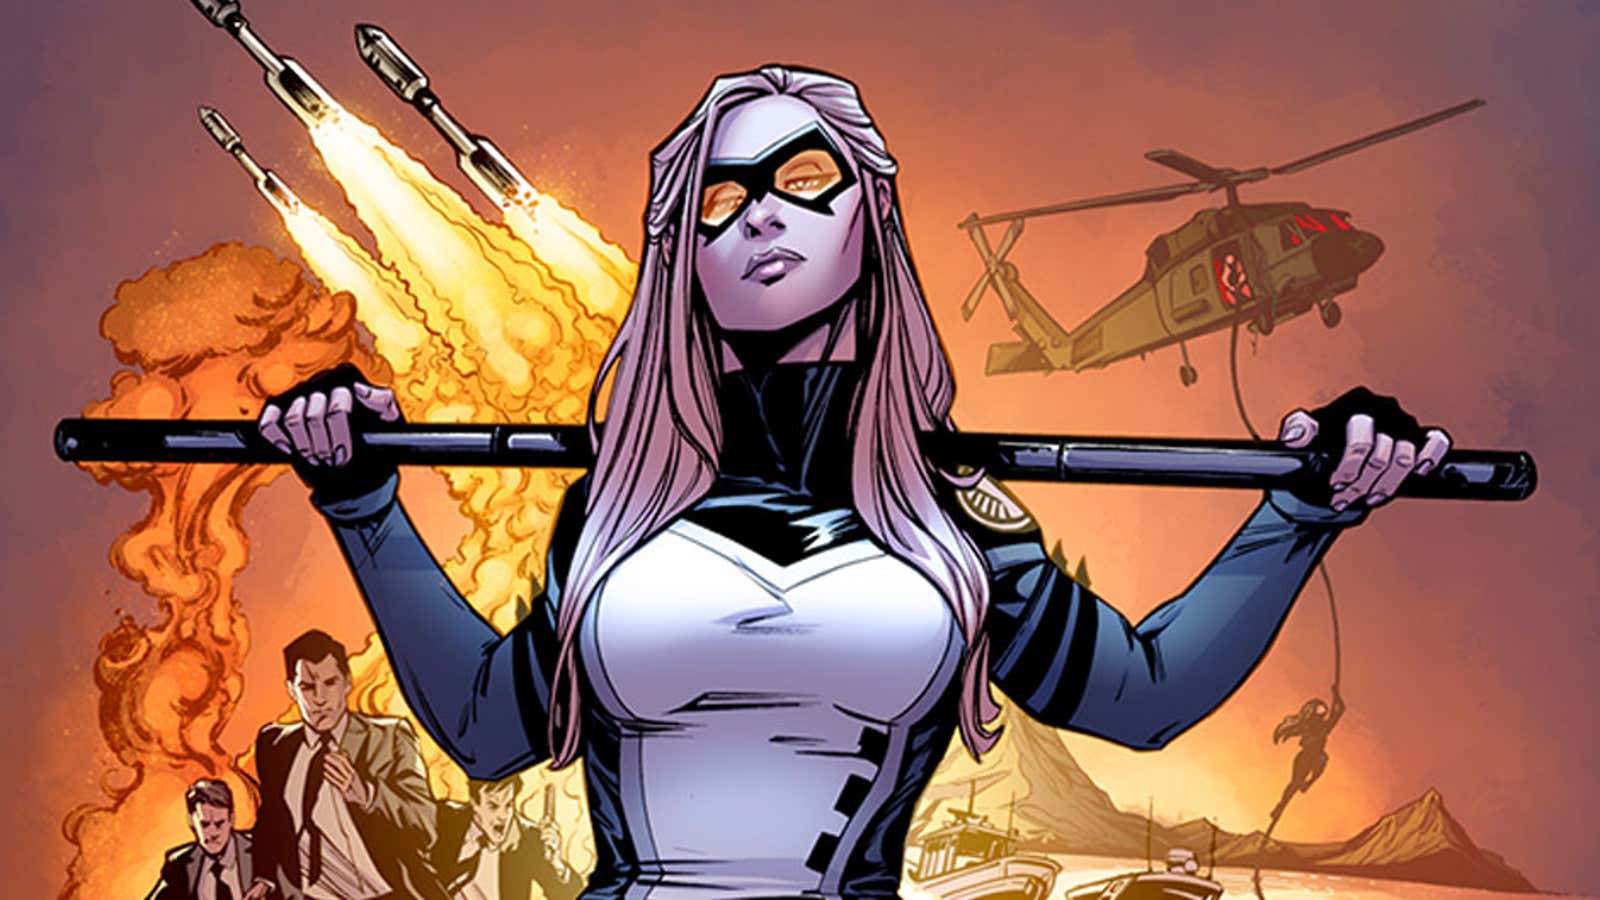 Chelsea Cain, who wrote the 8-comic book series Mockingbird for Marvel, has quit Twitter.